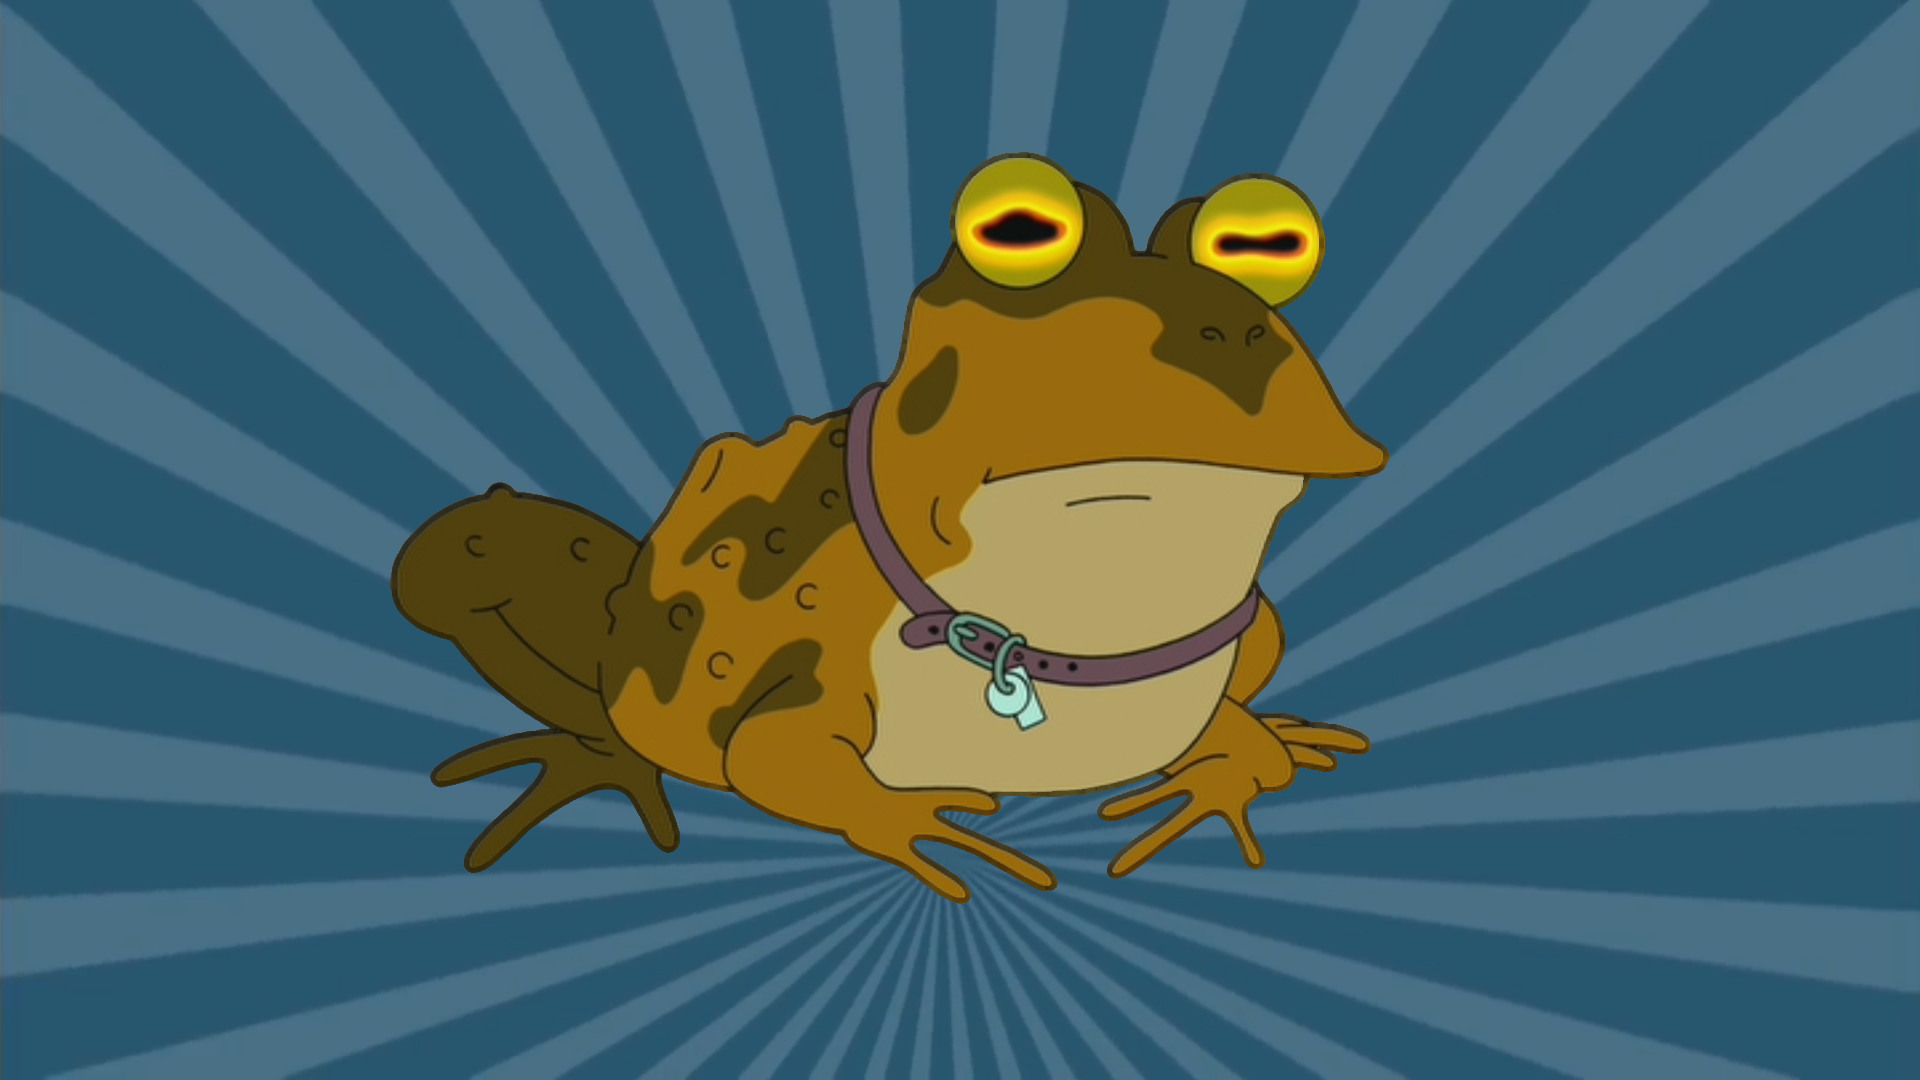 All Glory to the Hypnotoad [1920 x 1080] rwallpapers